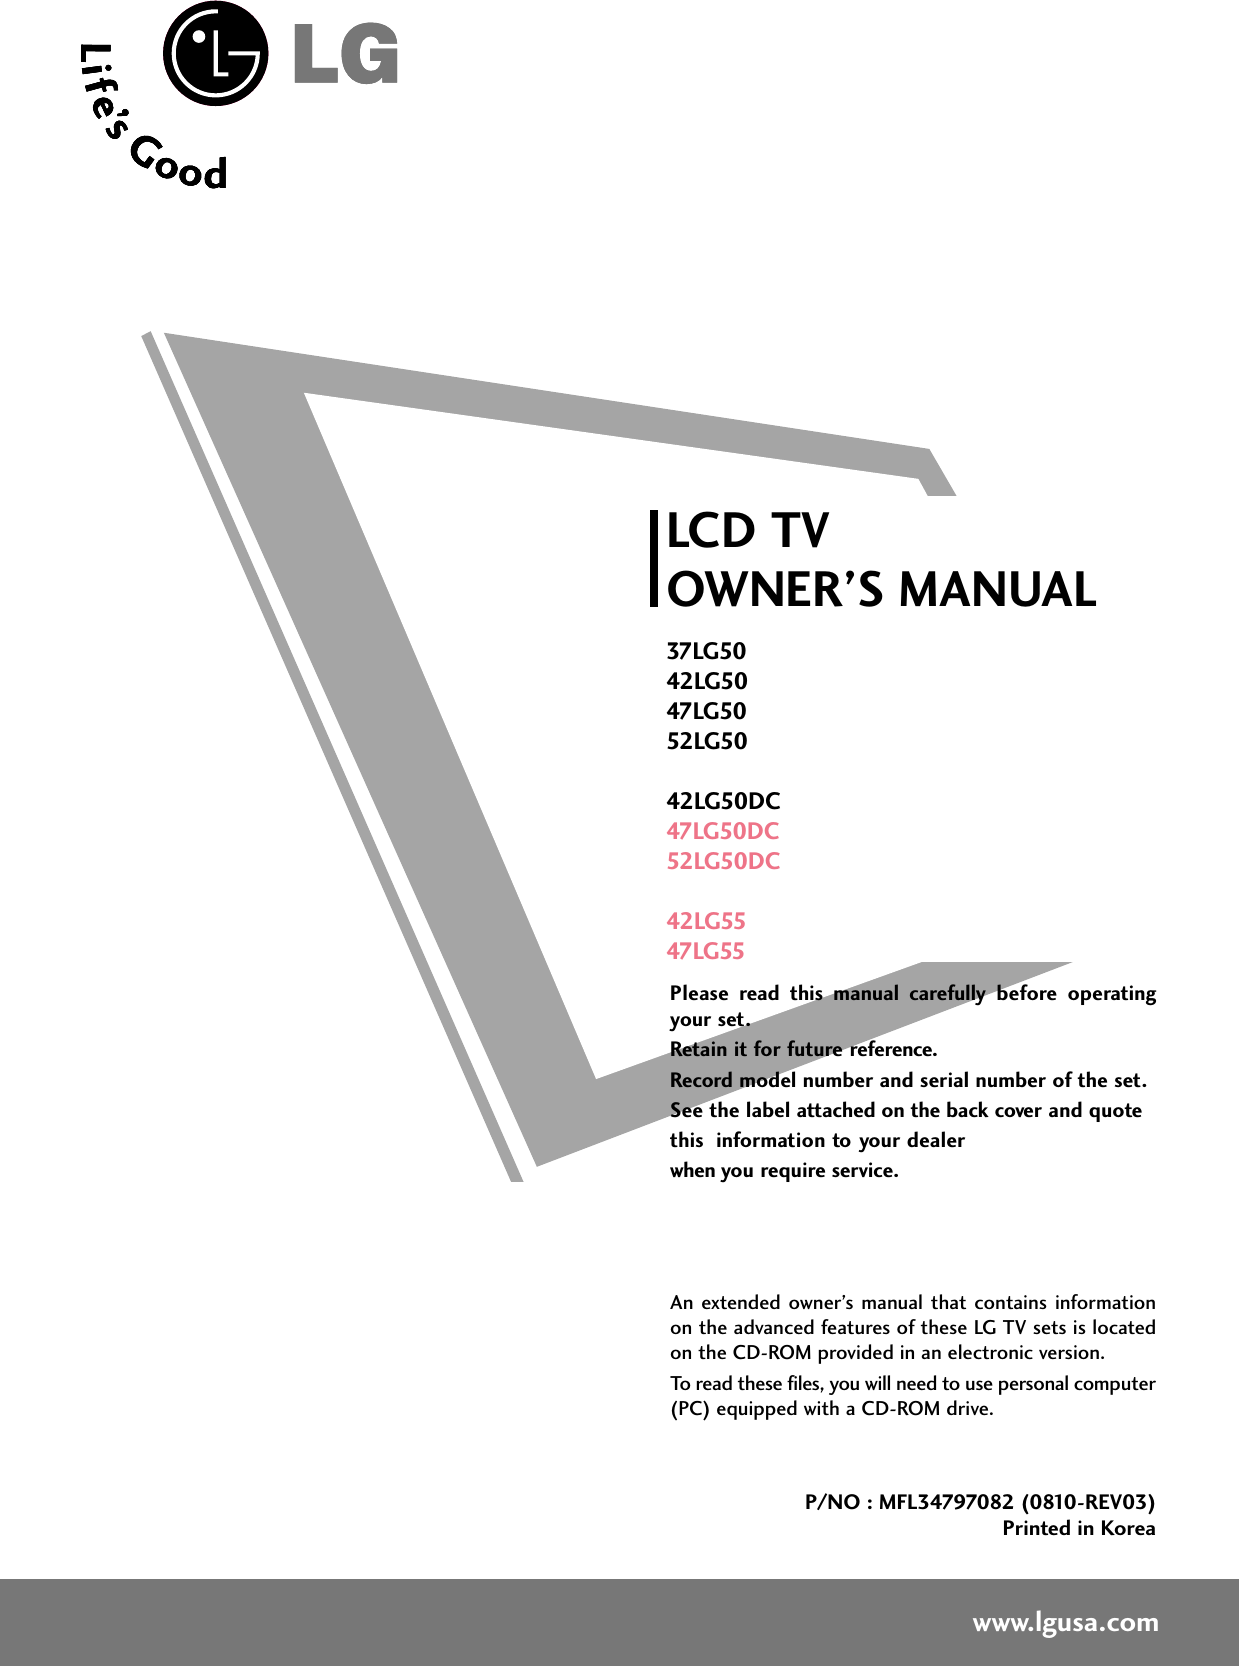 Please  read  this  manual  carefully  before  operatingyour set. Retain it for future reference.Record model number and serial number of the set. See the label attached on the back cover and quote this  information to your dealer when you require service.LCD TVOWNER’S MANUAL37LG5042LG5047LG5052LG5042LG50DC47LG50DC52LG50DC42LG5547LG55P/NO : MFL34797082 (0810-REV03)Printed in Koreawww.lgusa.comAn extended  owner’s  manual  that  contains informationon the advanced features of these LG TV sets is locatedon the CD-ROM provided in an electronic version.To read these files, you will need to use personal computer(PC) equipped with a CD-ROM drive.